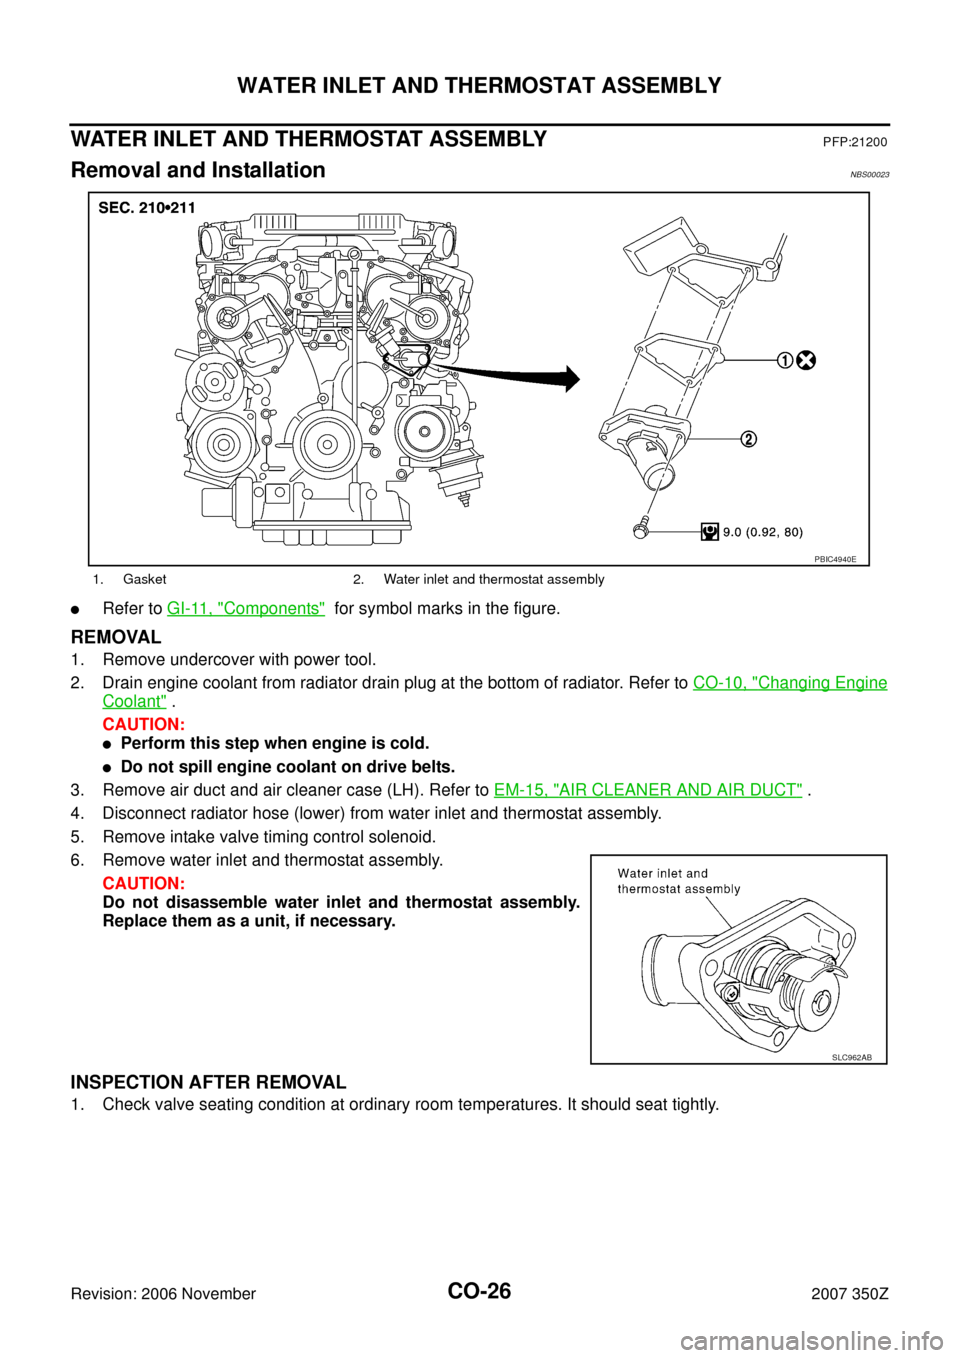 NISSAN 350Z 2007 Z33 Engine Cooling System Workshop Manual CO-26
WATER INLET AND THERMOSTAT ASSEMBLY
Revision: 2006 November2007 350Z
WATER INLET AND THERMOSTAT ASSEMBLYPFP:21200
Removal and InstallationNBS00023
Refer to GI-11, "Components"  for symbol marks